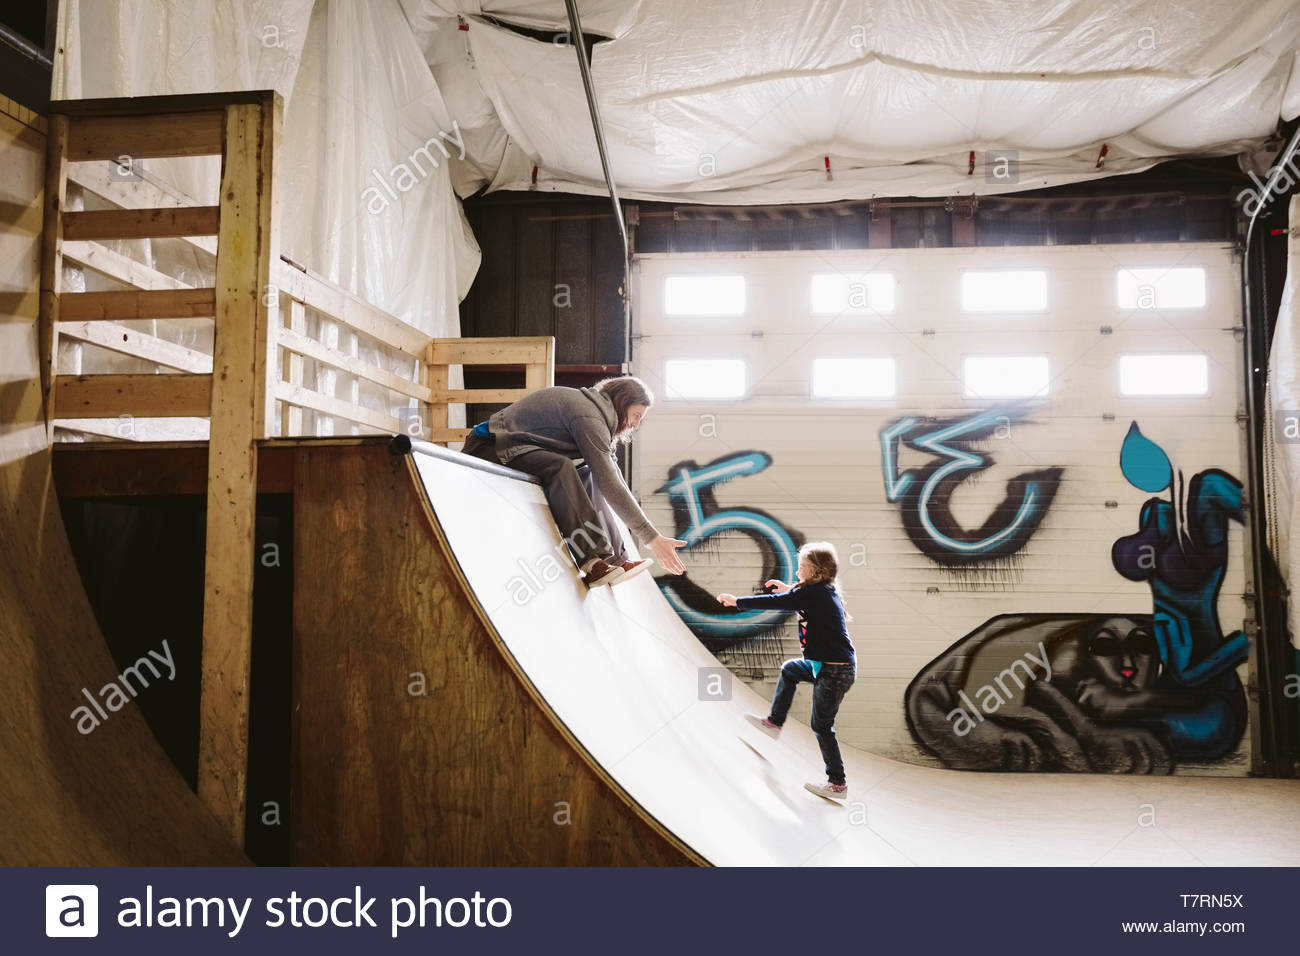 Father reaching for daughter on ramp at indoor skate park Stock Photo